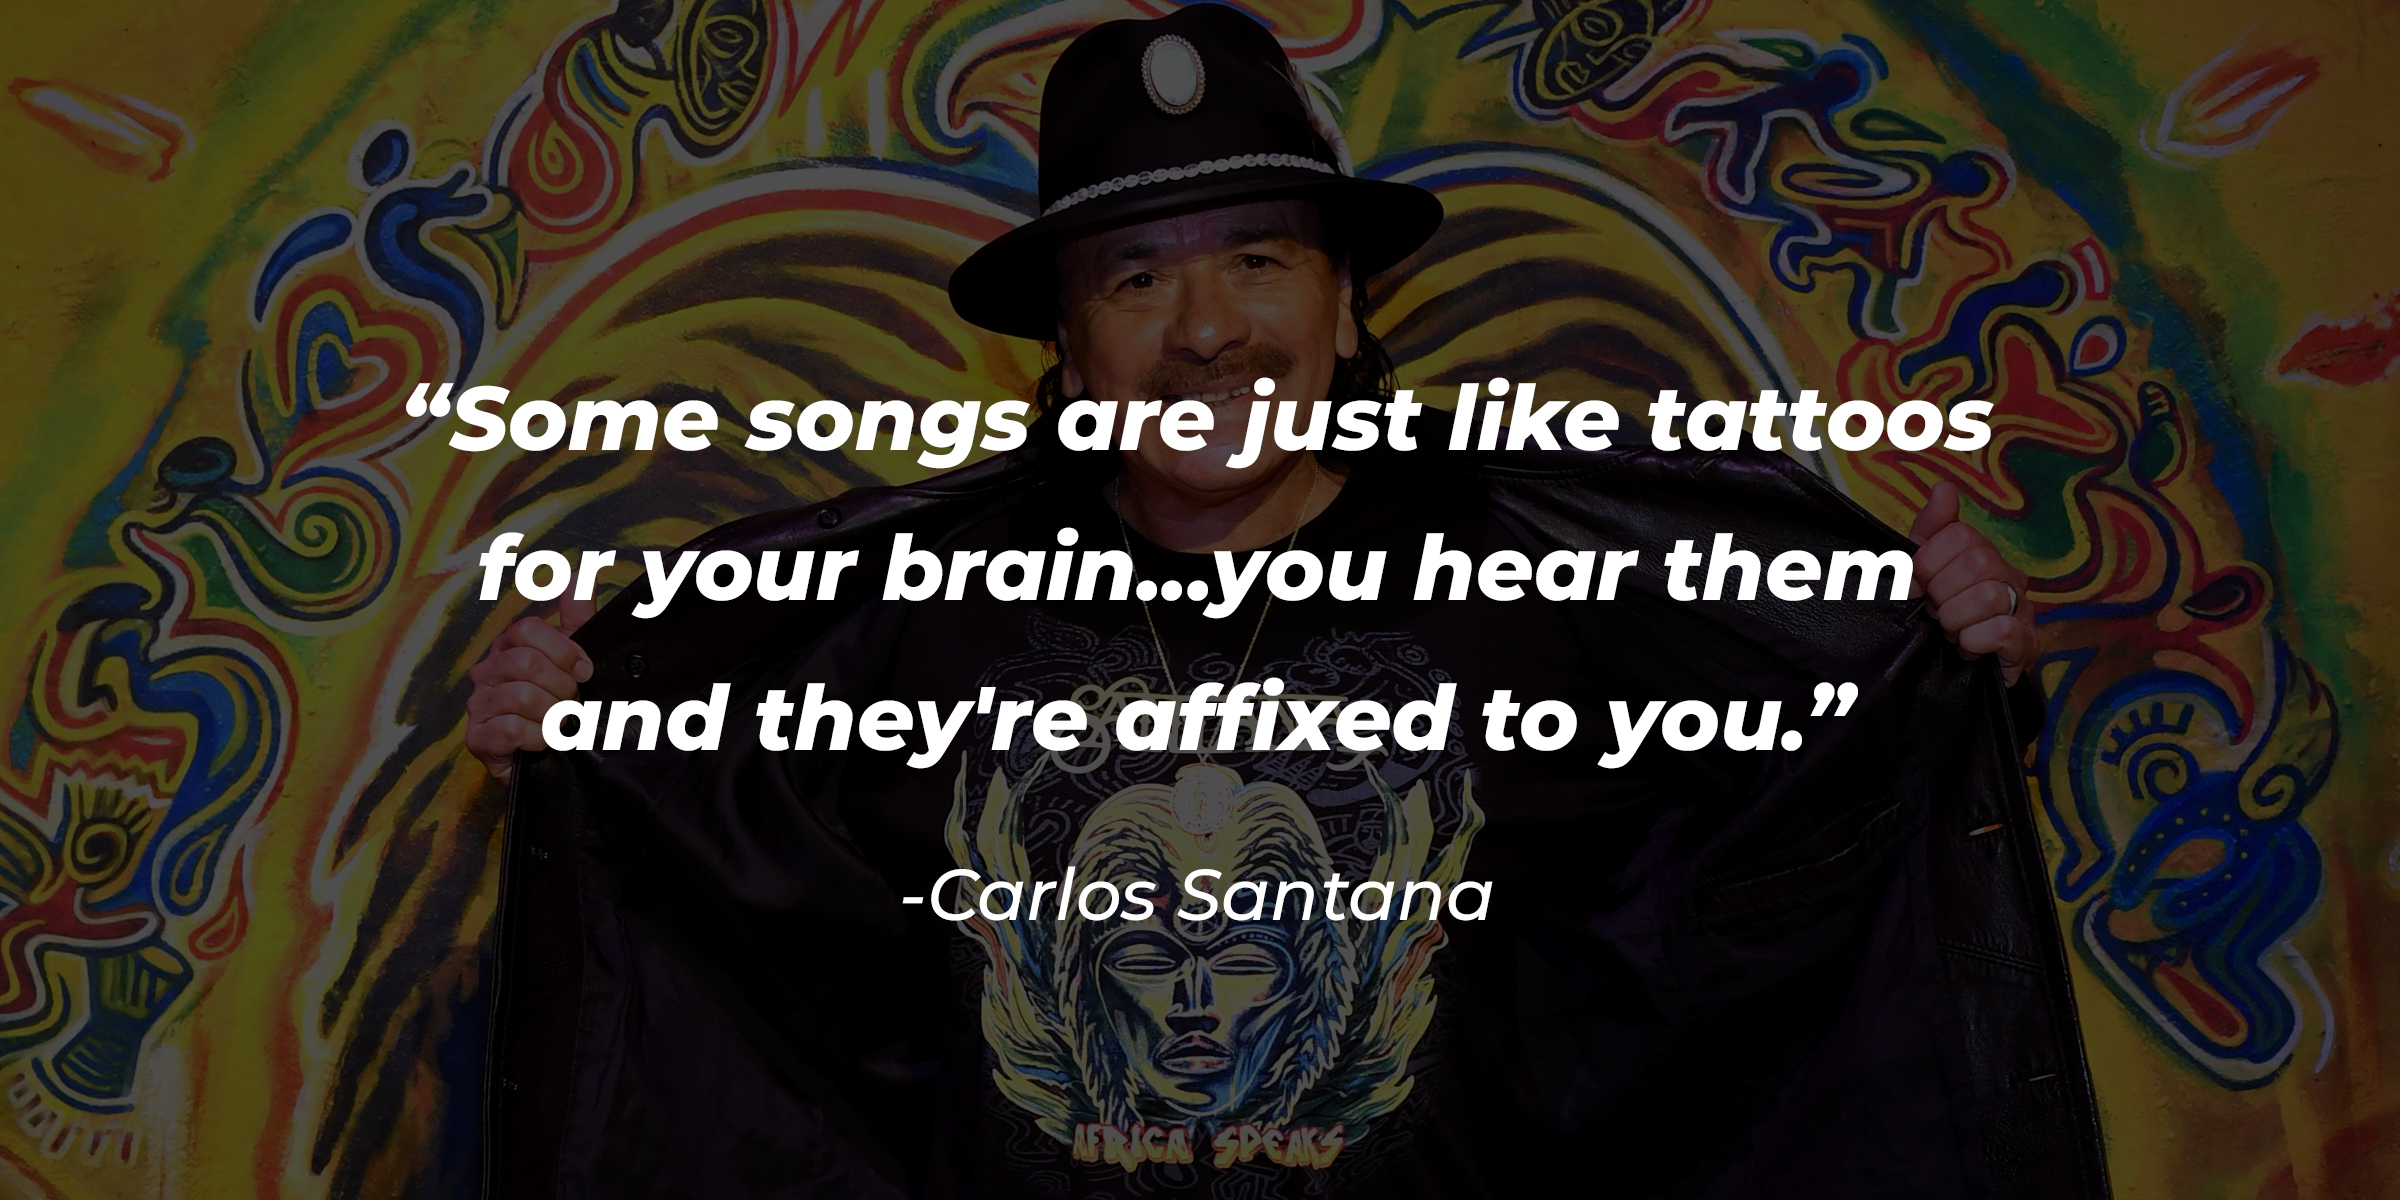 Carlos Santana with his quote: “Some songs are just like tattoos for your brain... you hear them and they're affixed to you.” | Source: Getty Images